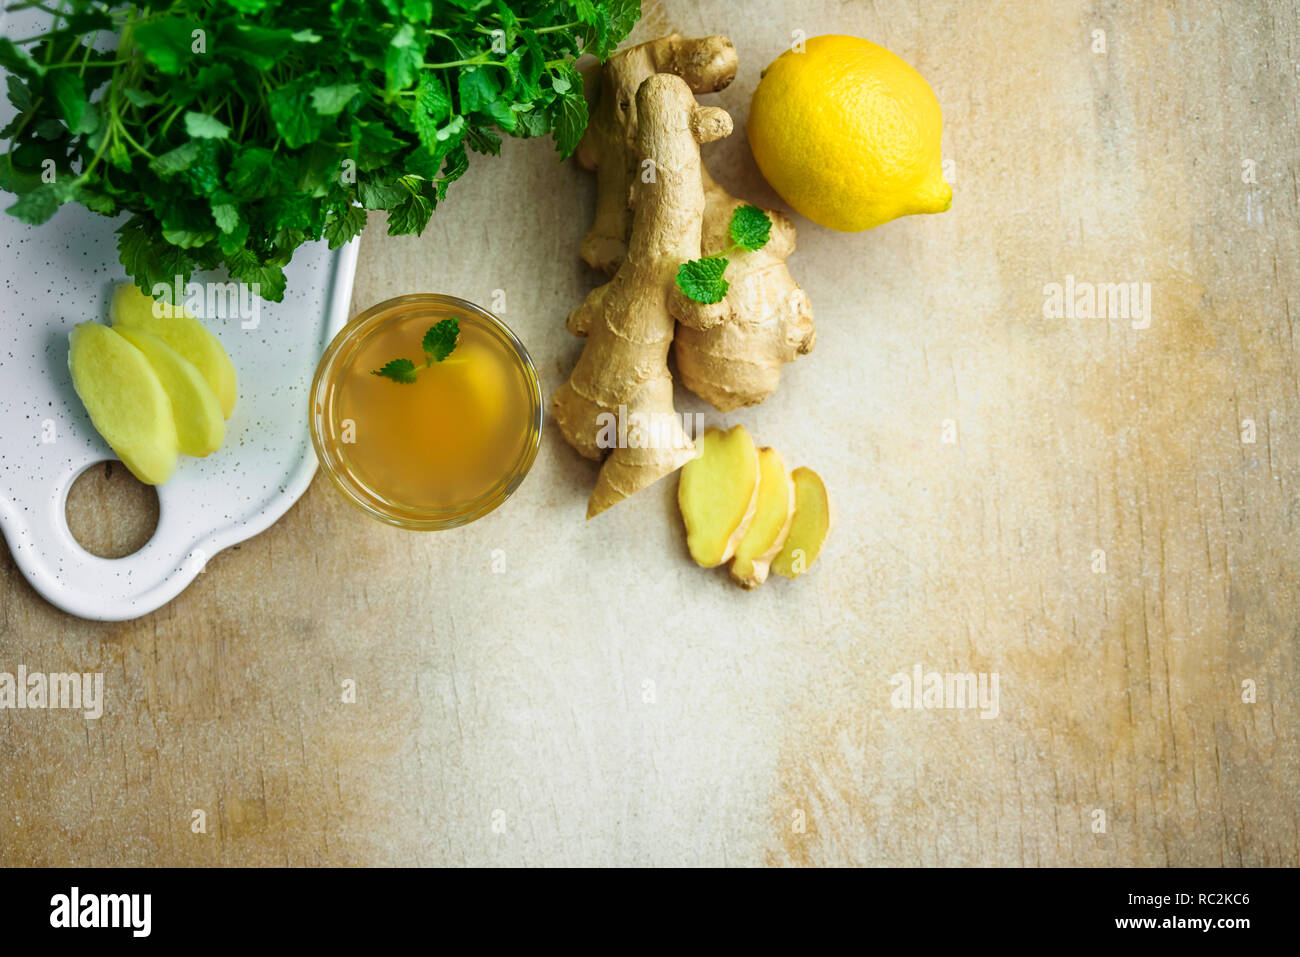 Glass with ginger detox water and ingredients near it. Wooden background. Top view. Copy space Stock Photo